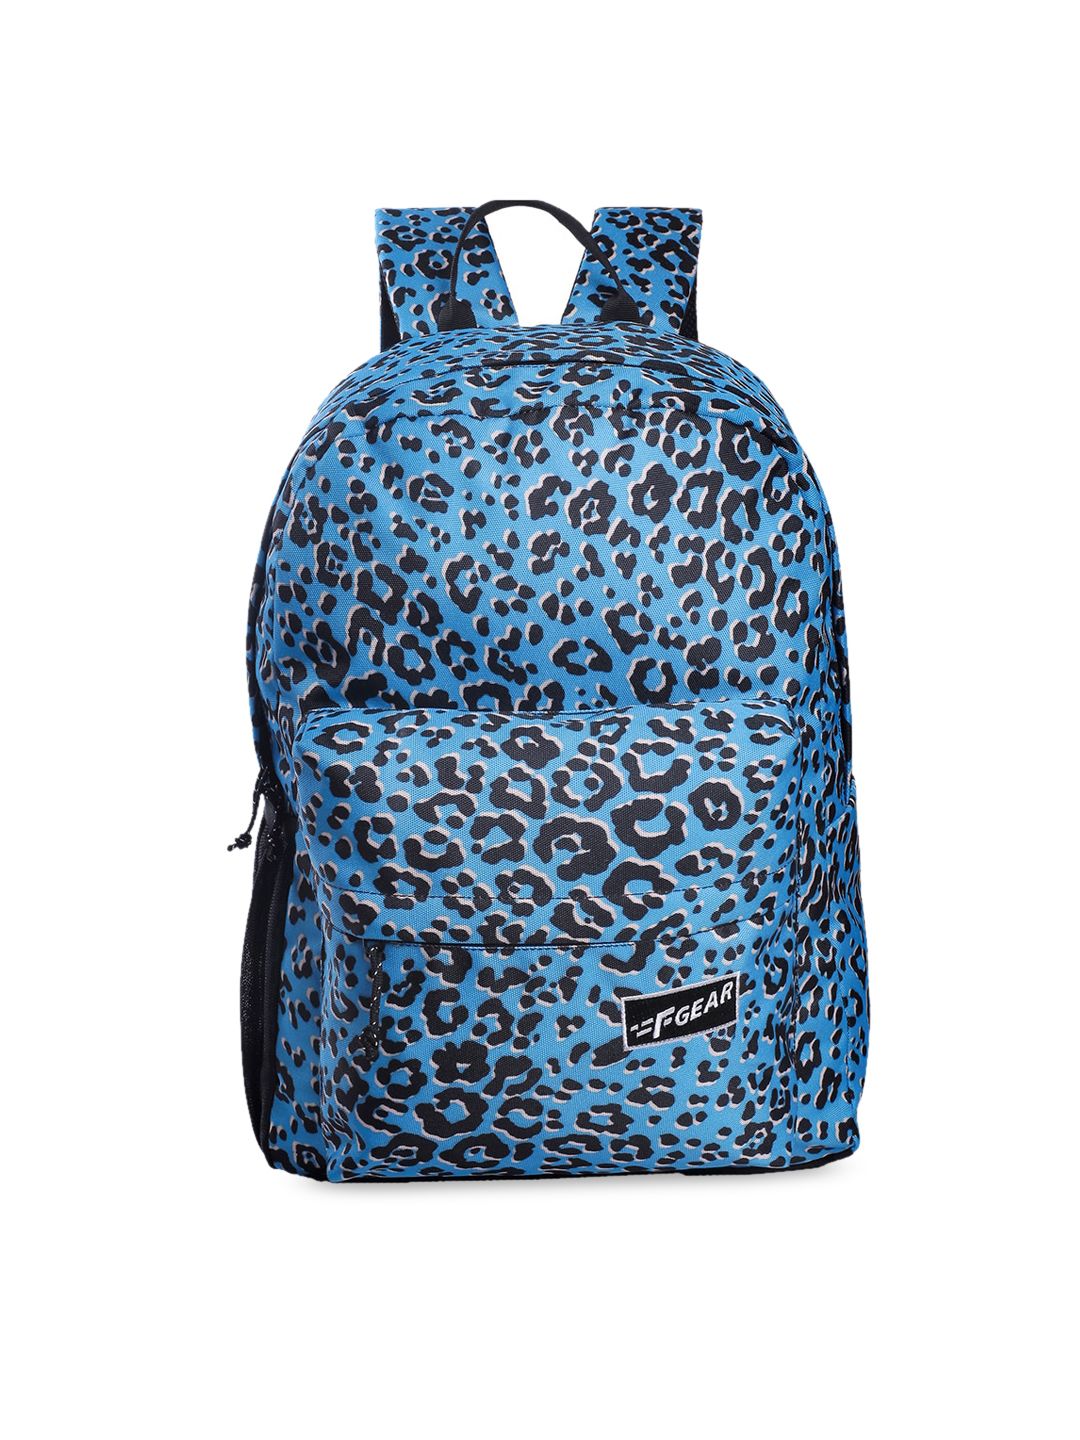 F Gear Unisex Blue & Black Backpack Price in India